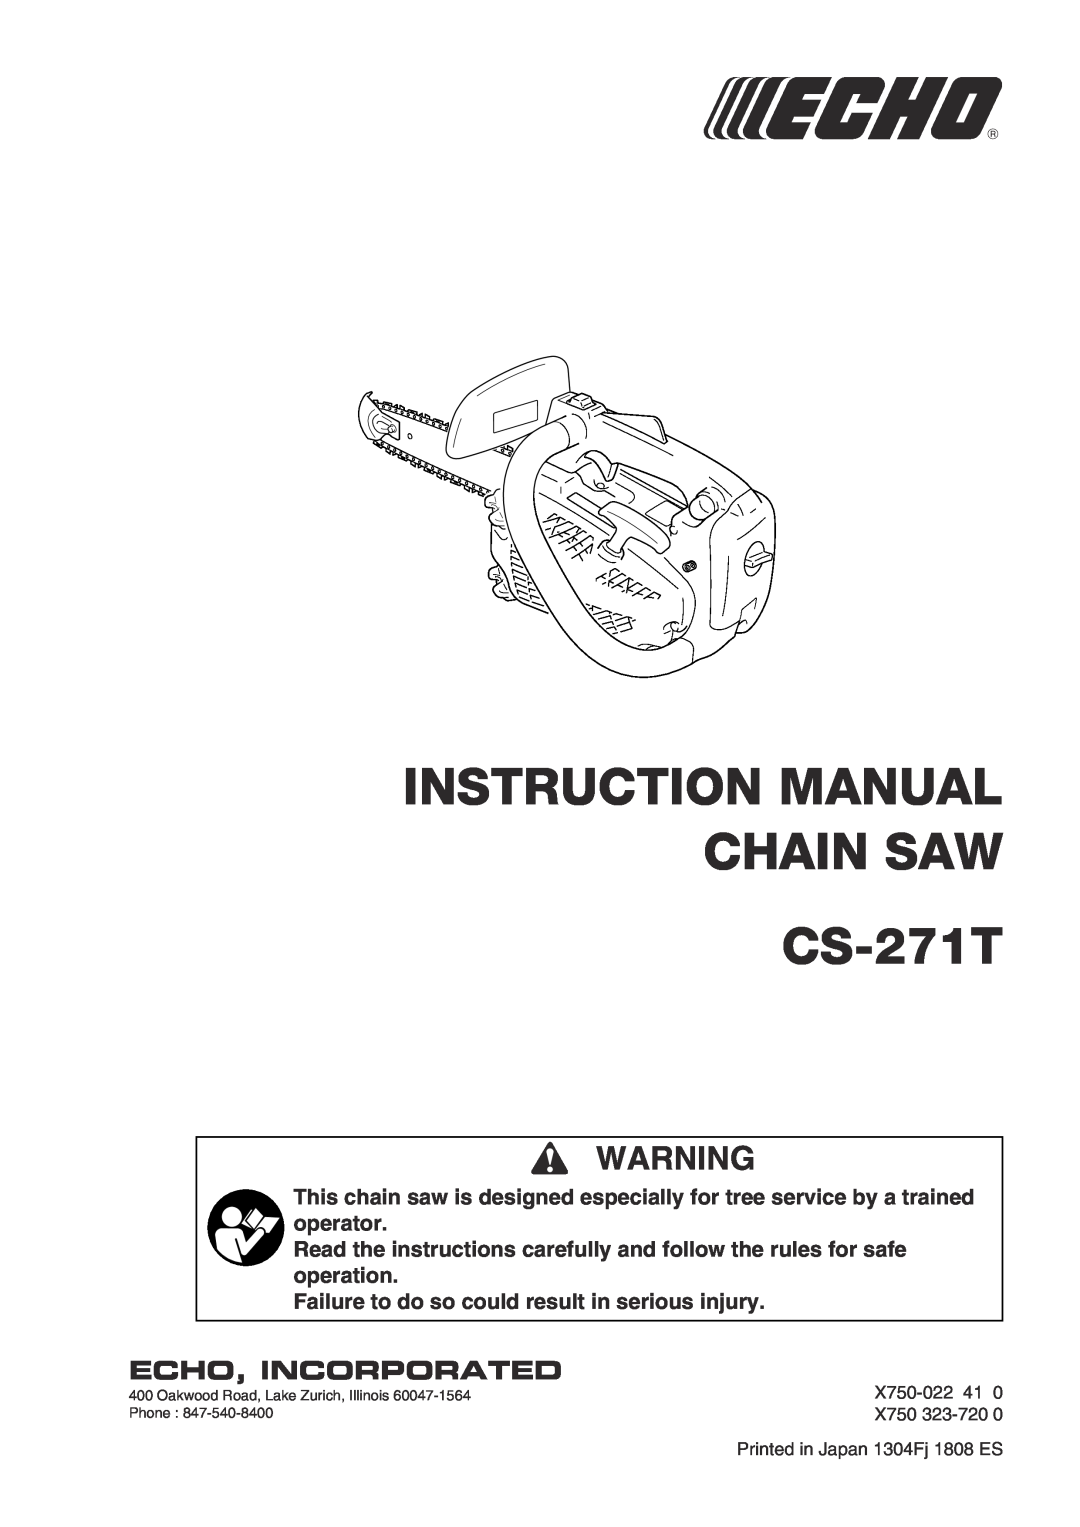 Echo instruction manual instruction manual chain saw CS-271T, echo, incorporated 